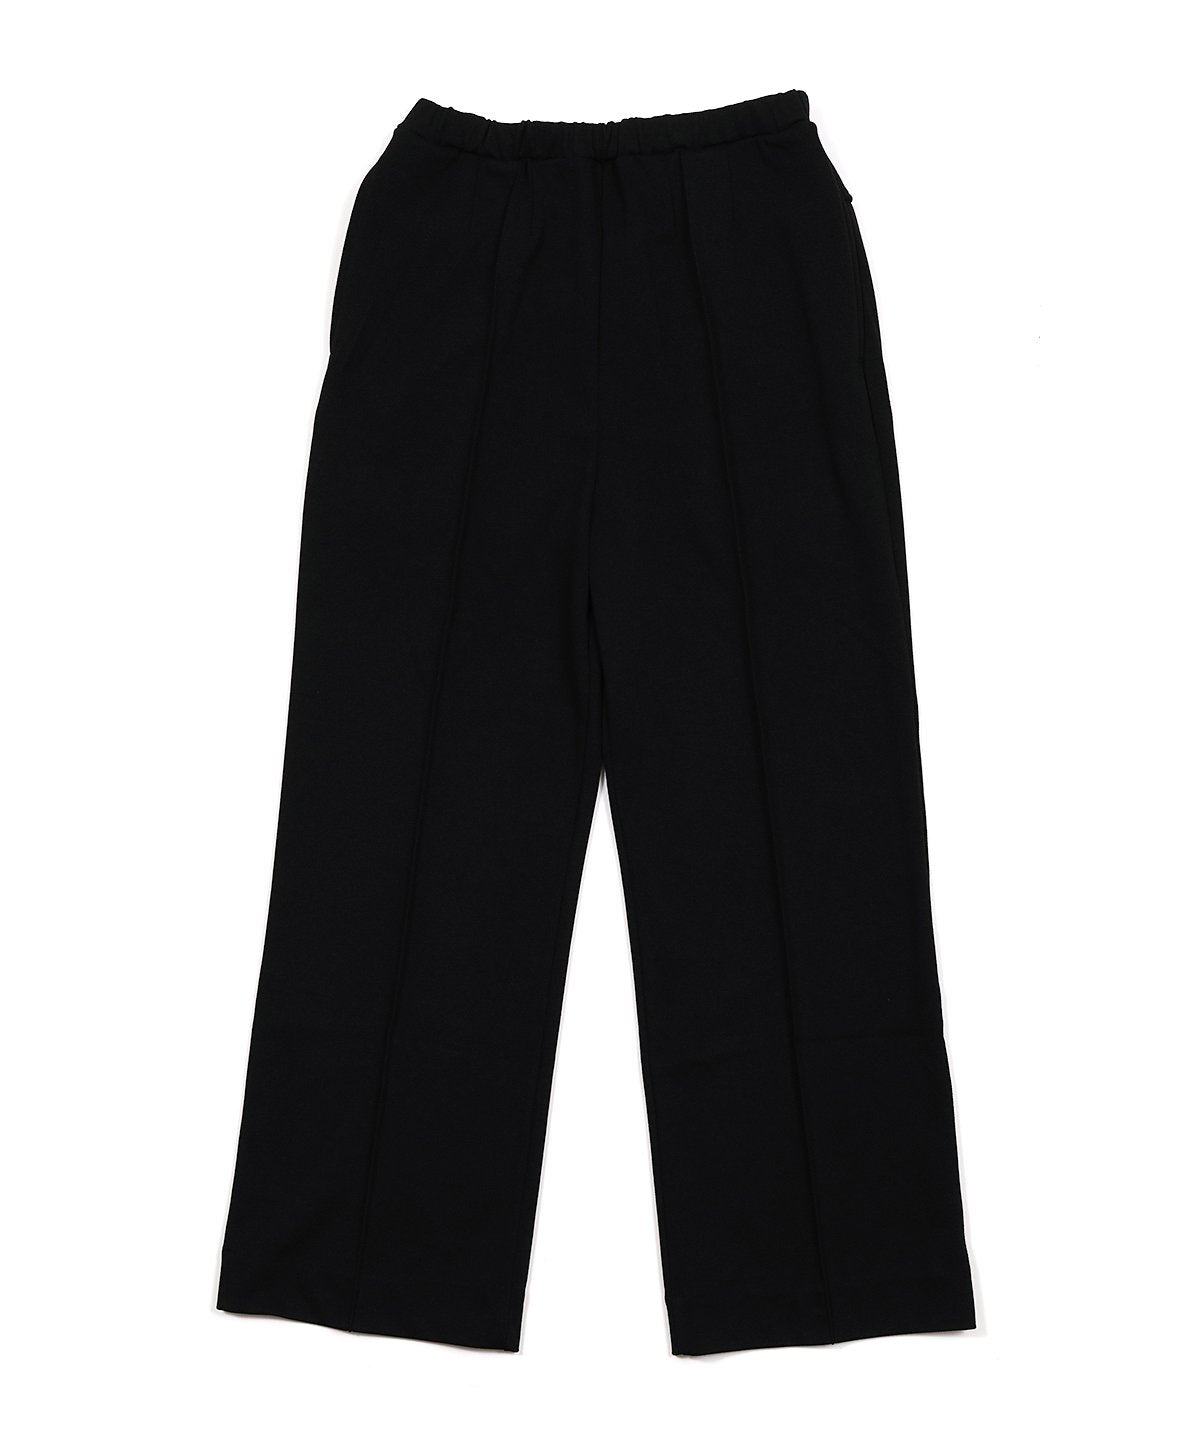 FRENCH JERSEY TROUSER